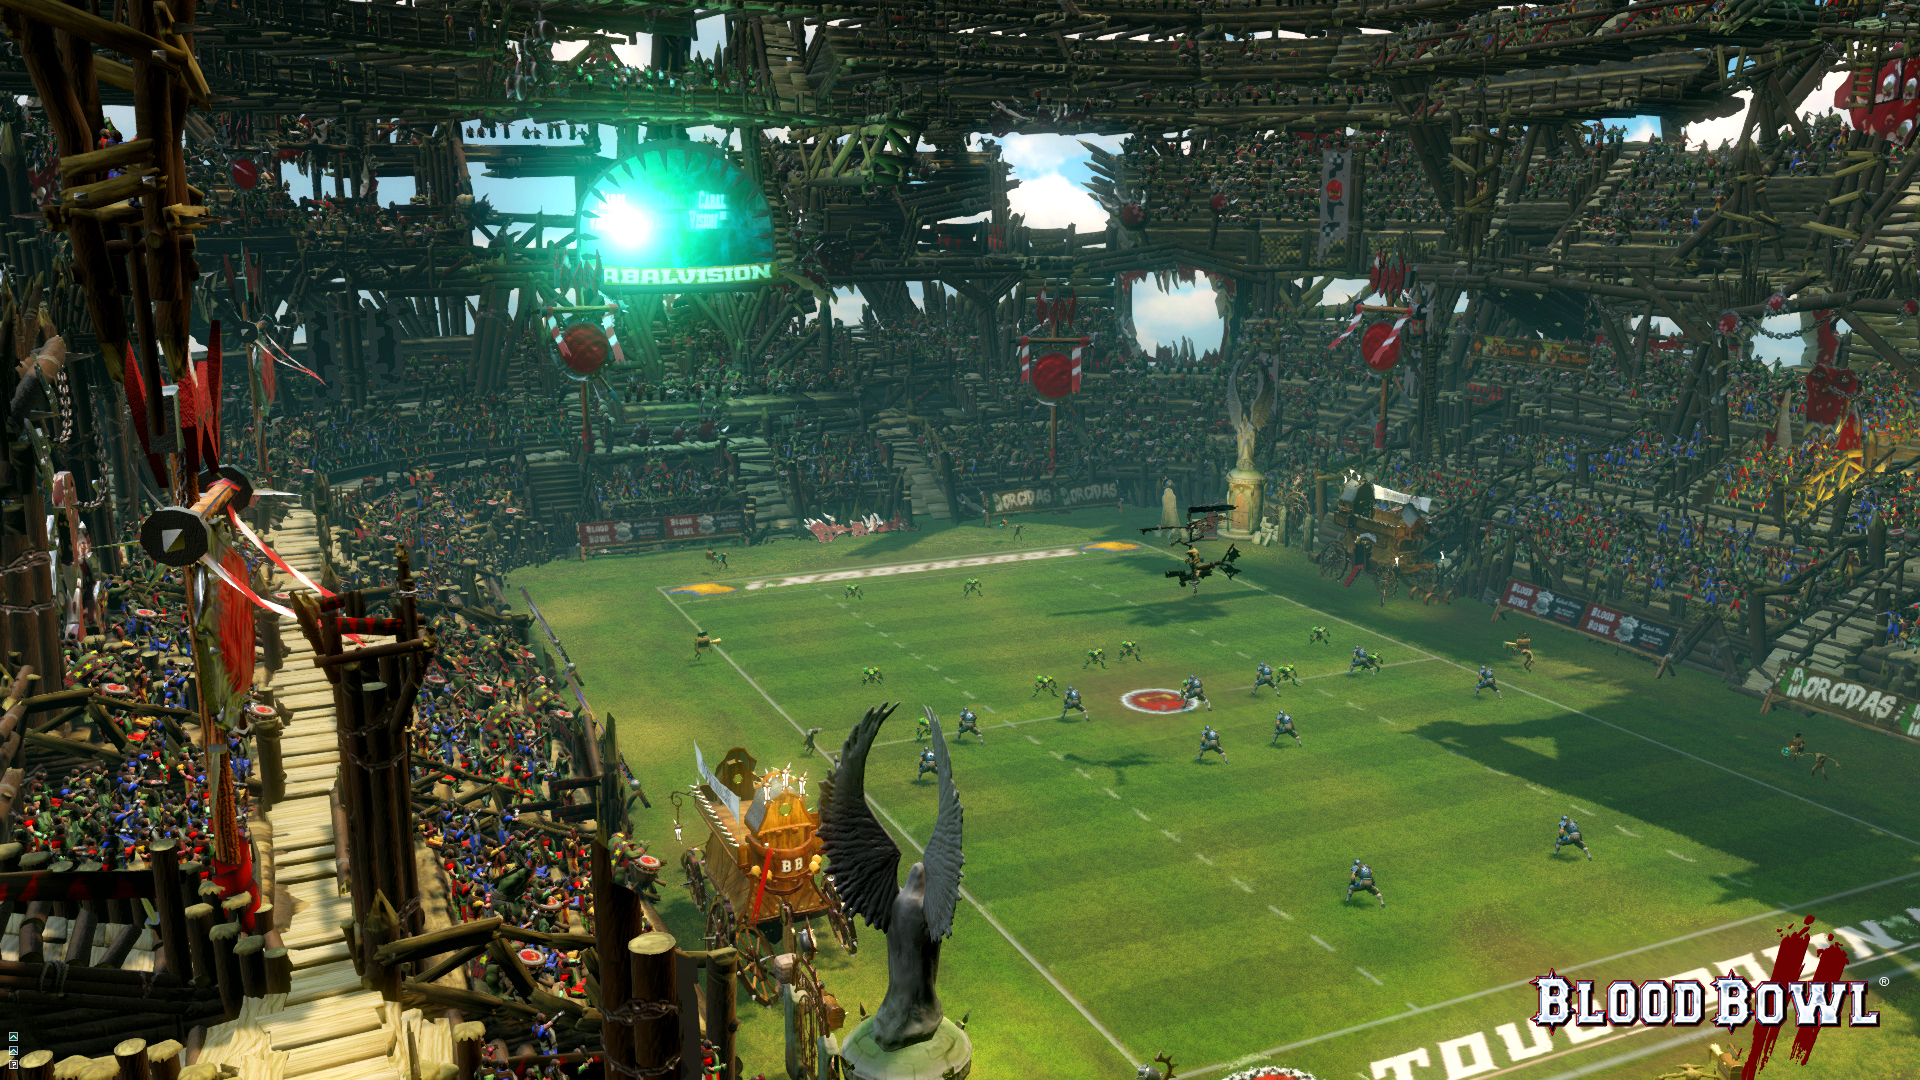 Blood Bowl features a number of arenas featuring many of the factions from Warhammer Fantasy